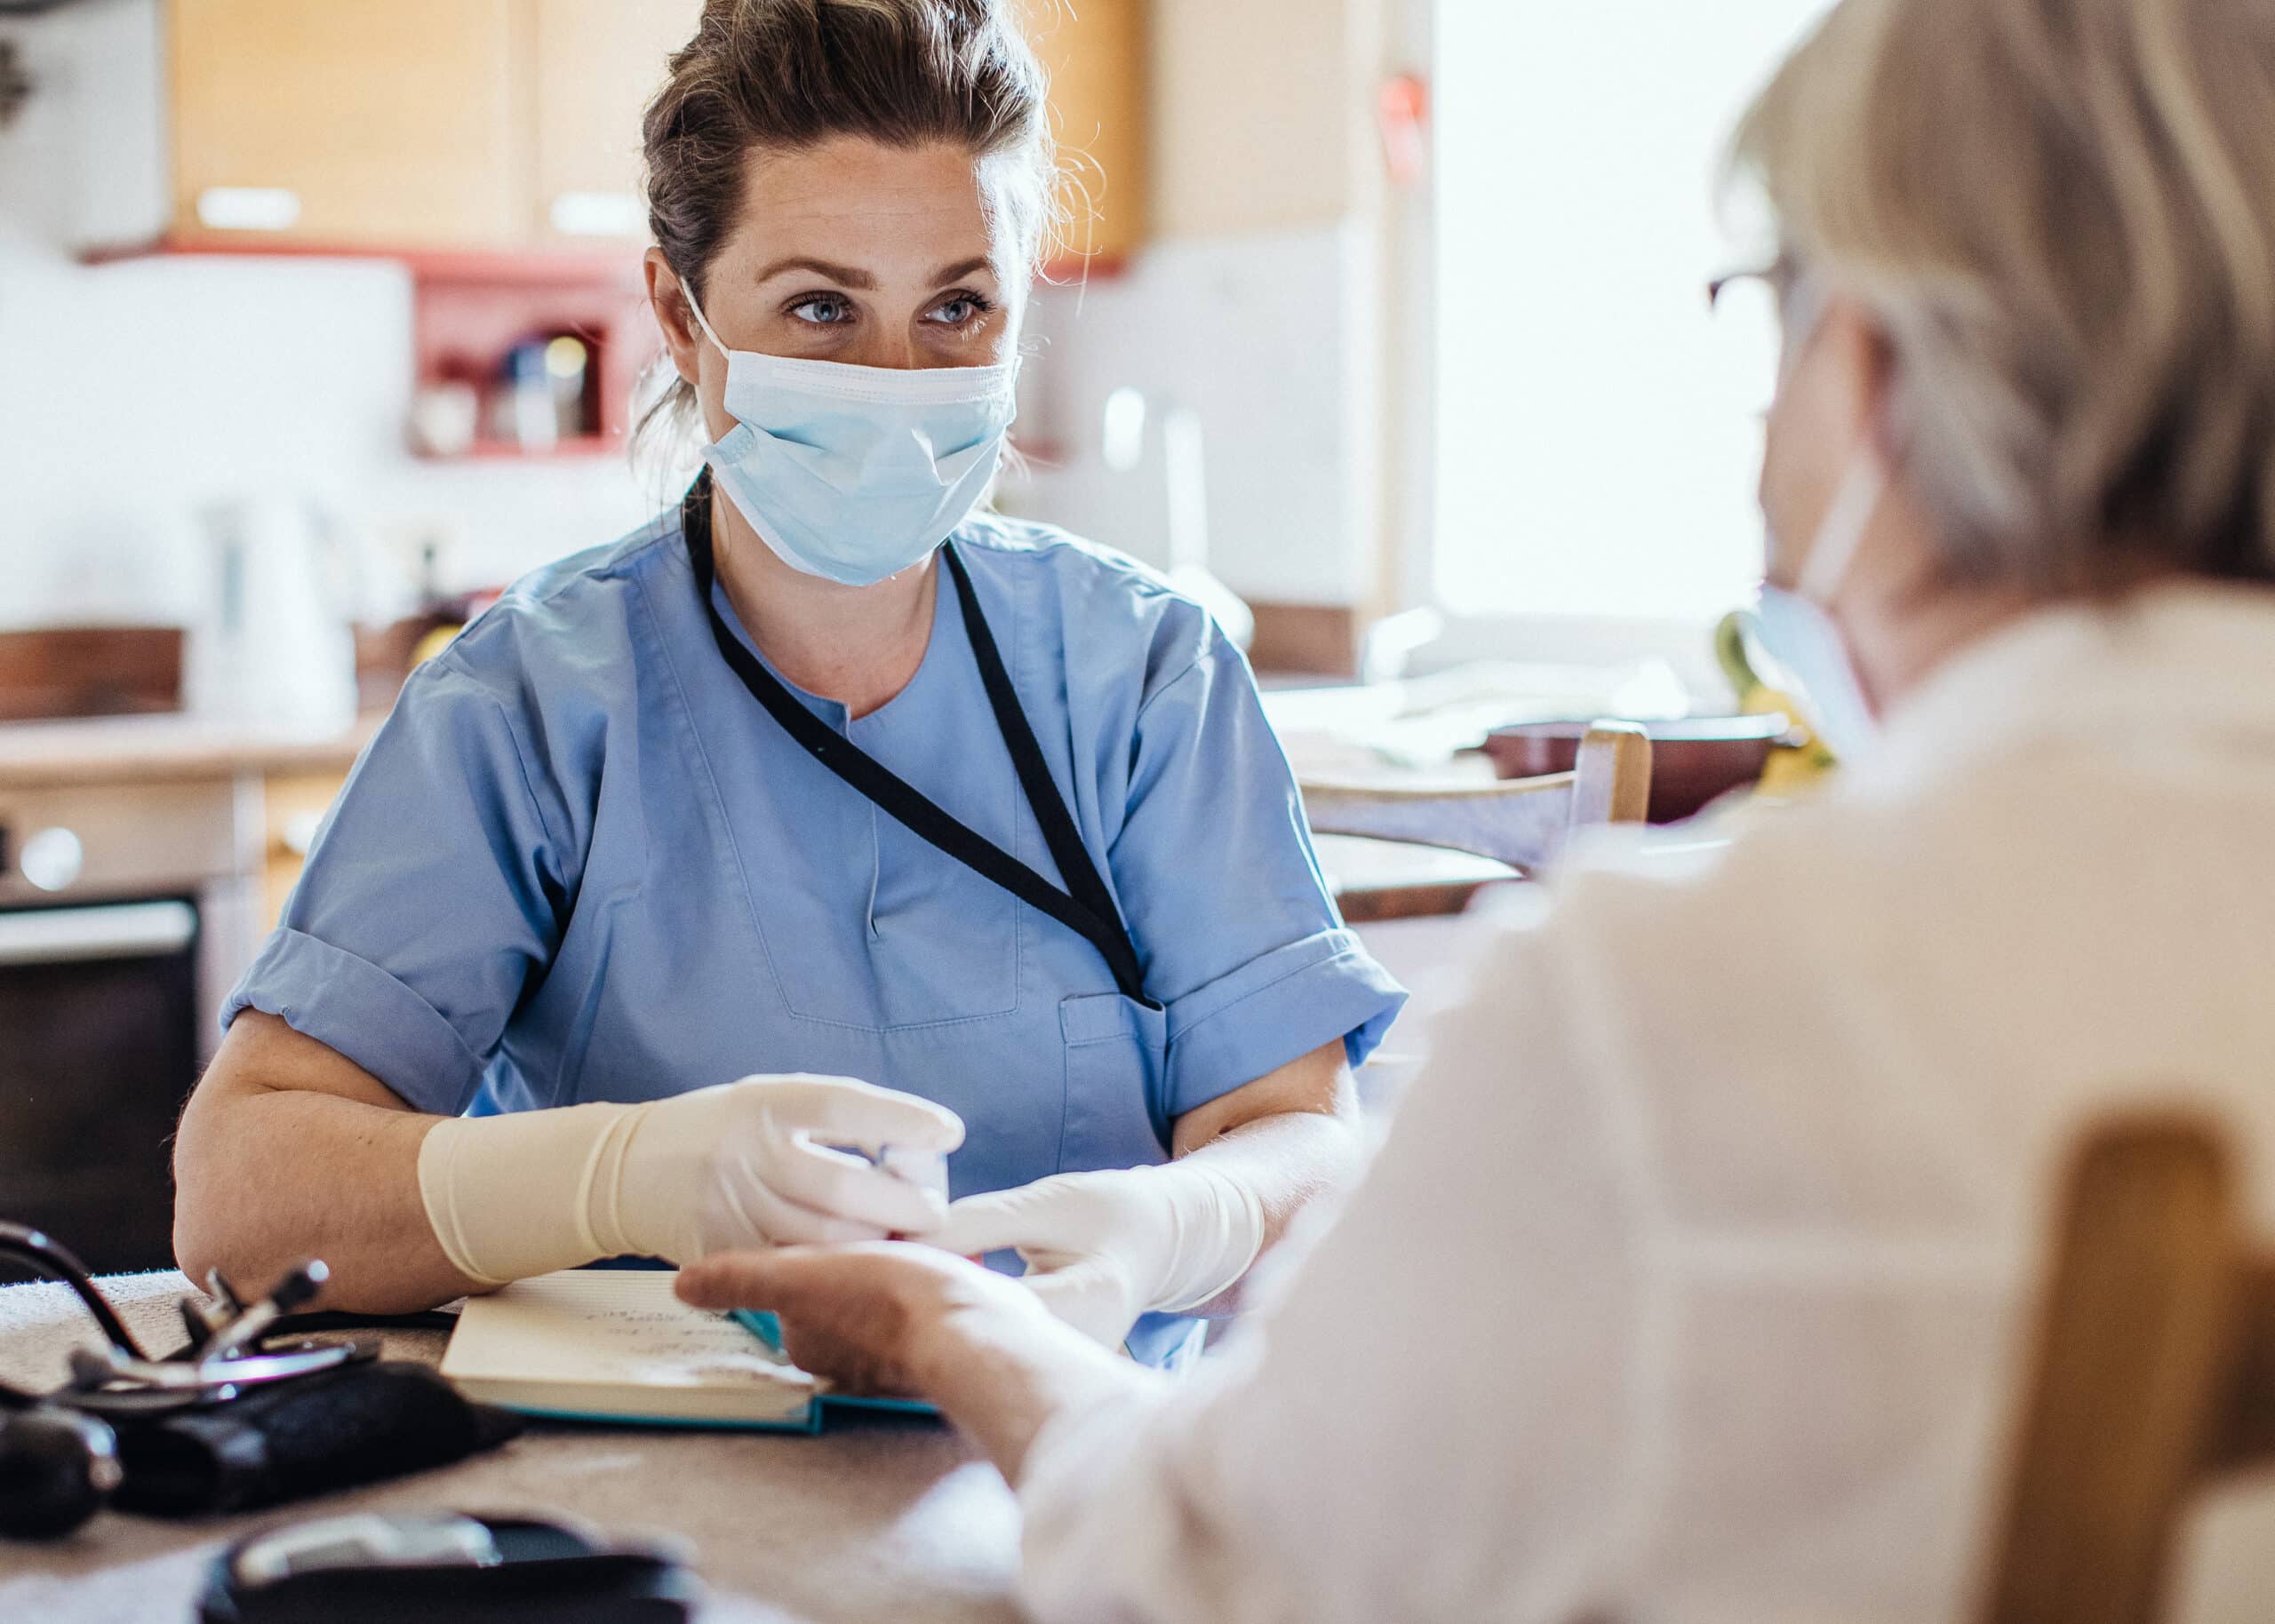 A doctor in personal protective gear talking to a patient and writing down notes